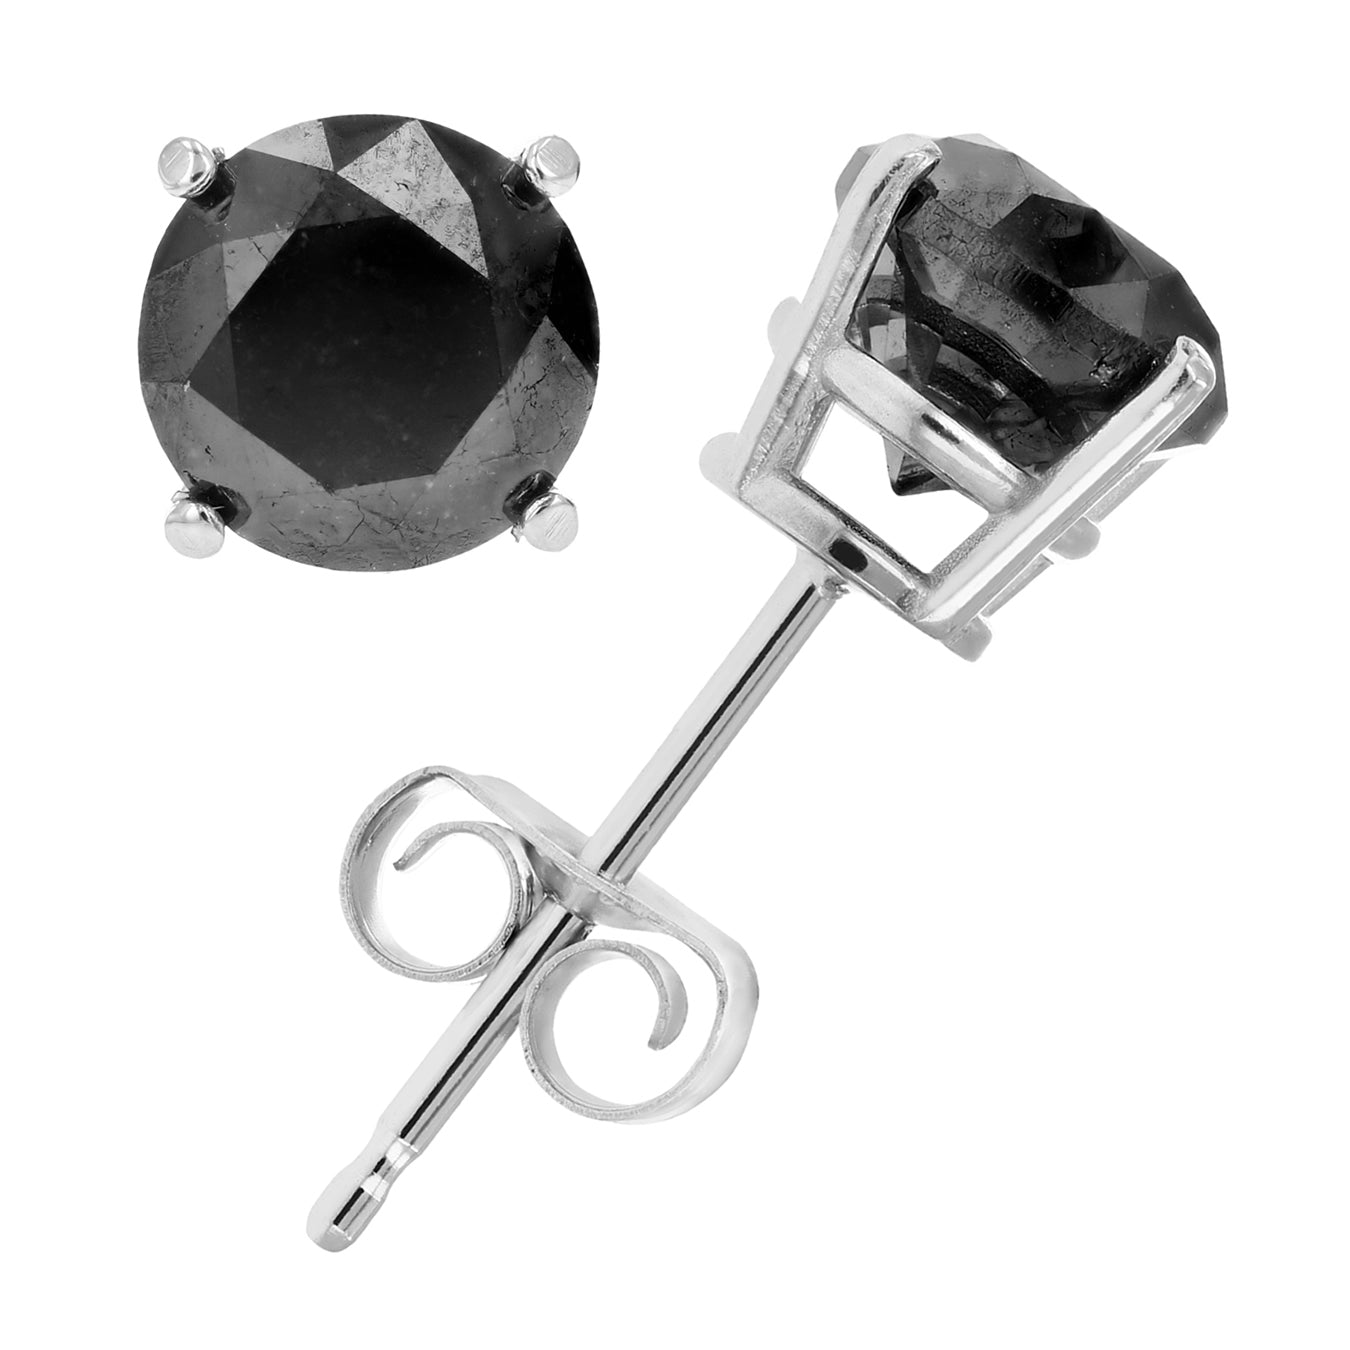 8 cttw Black Diamond Stud Earrings .925 Sterling Silver Round with Push Backs